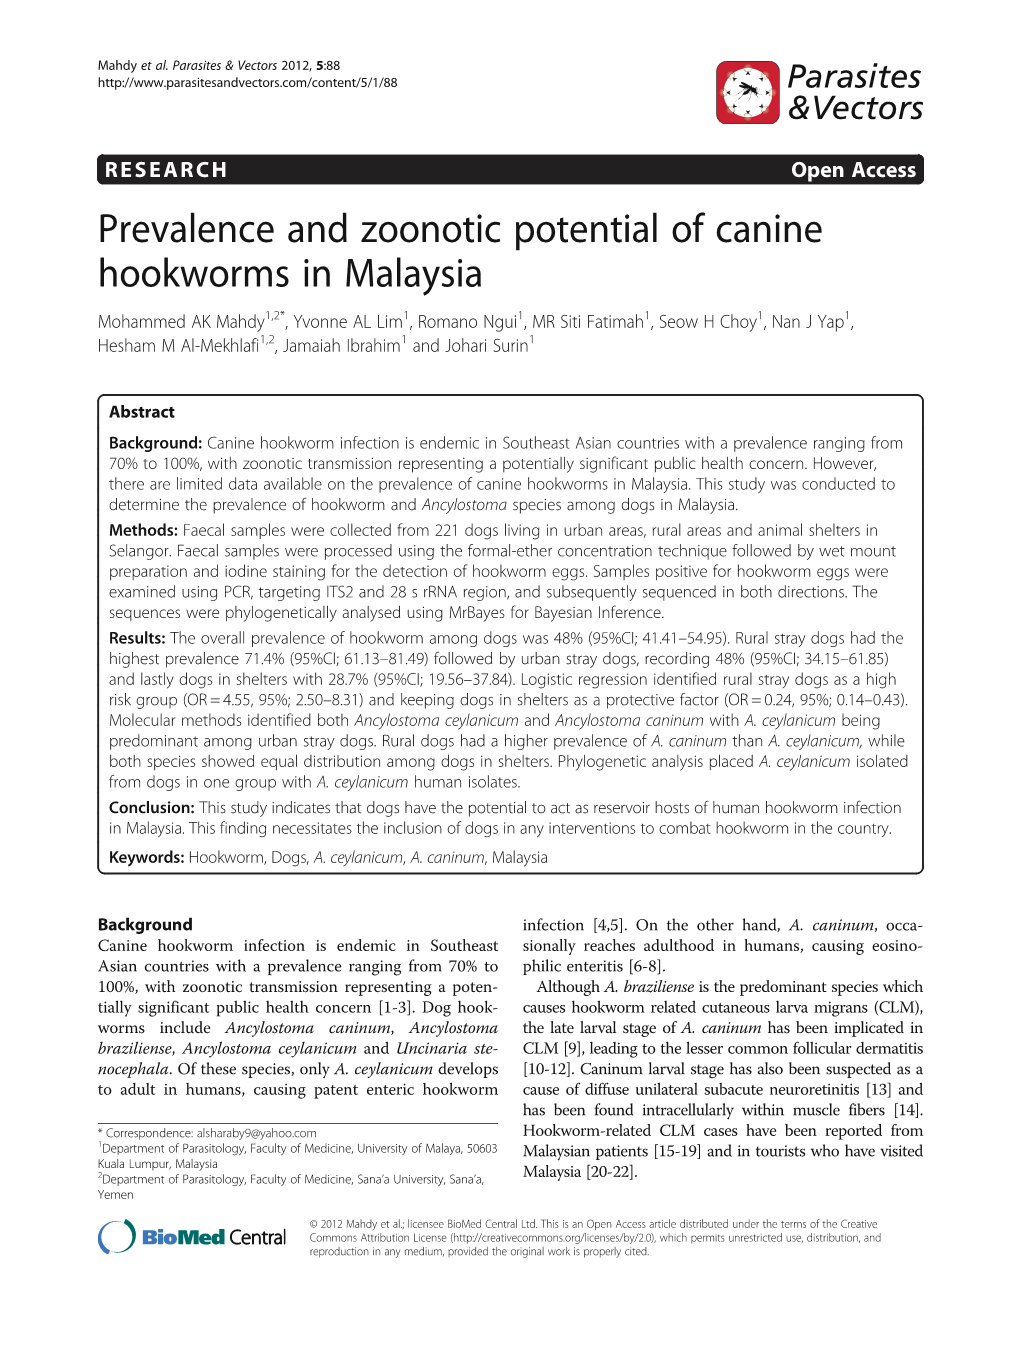 Prevalence and Zoonotic Potential of Canine Hookworms in Malaysia